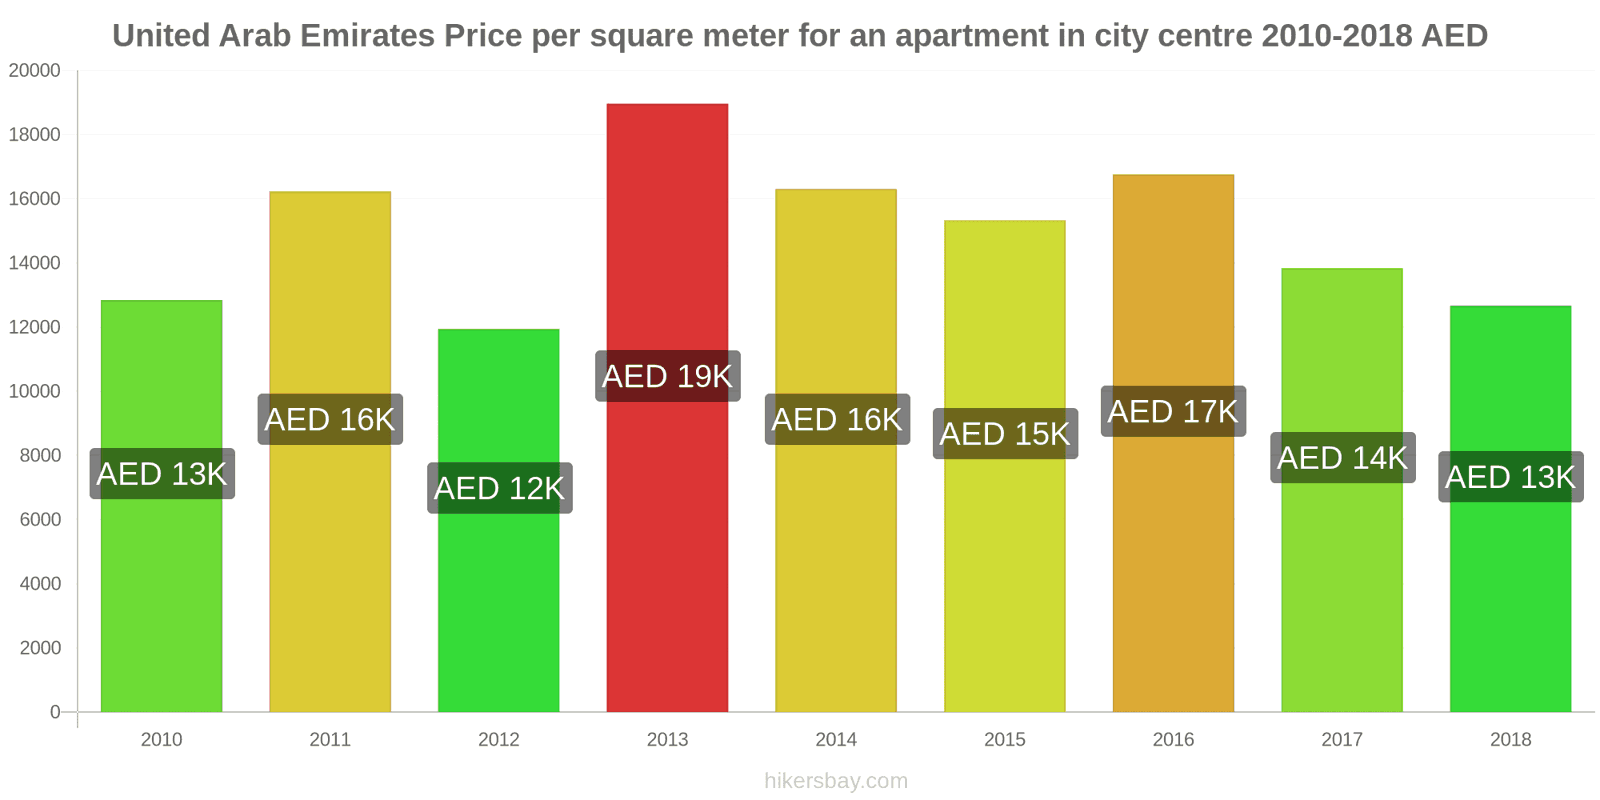 United Arab Emirates price changes Price per square meter for an apartment in the city center hikersbay.com